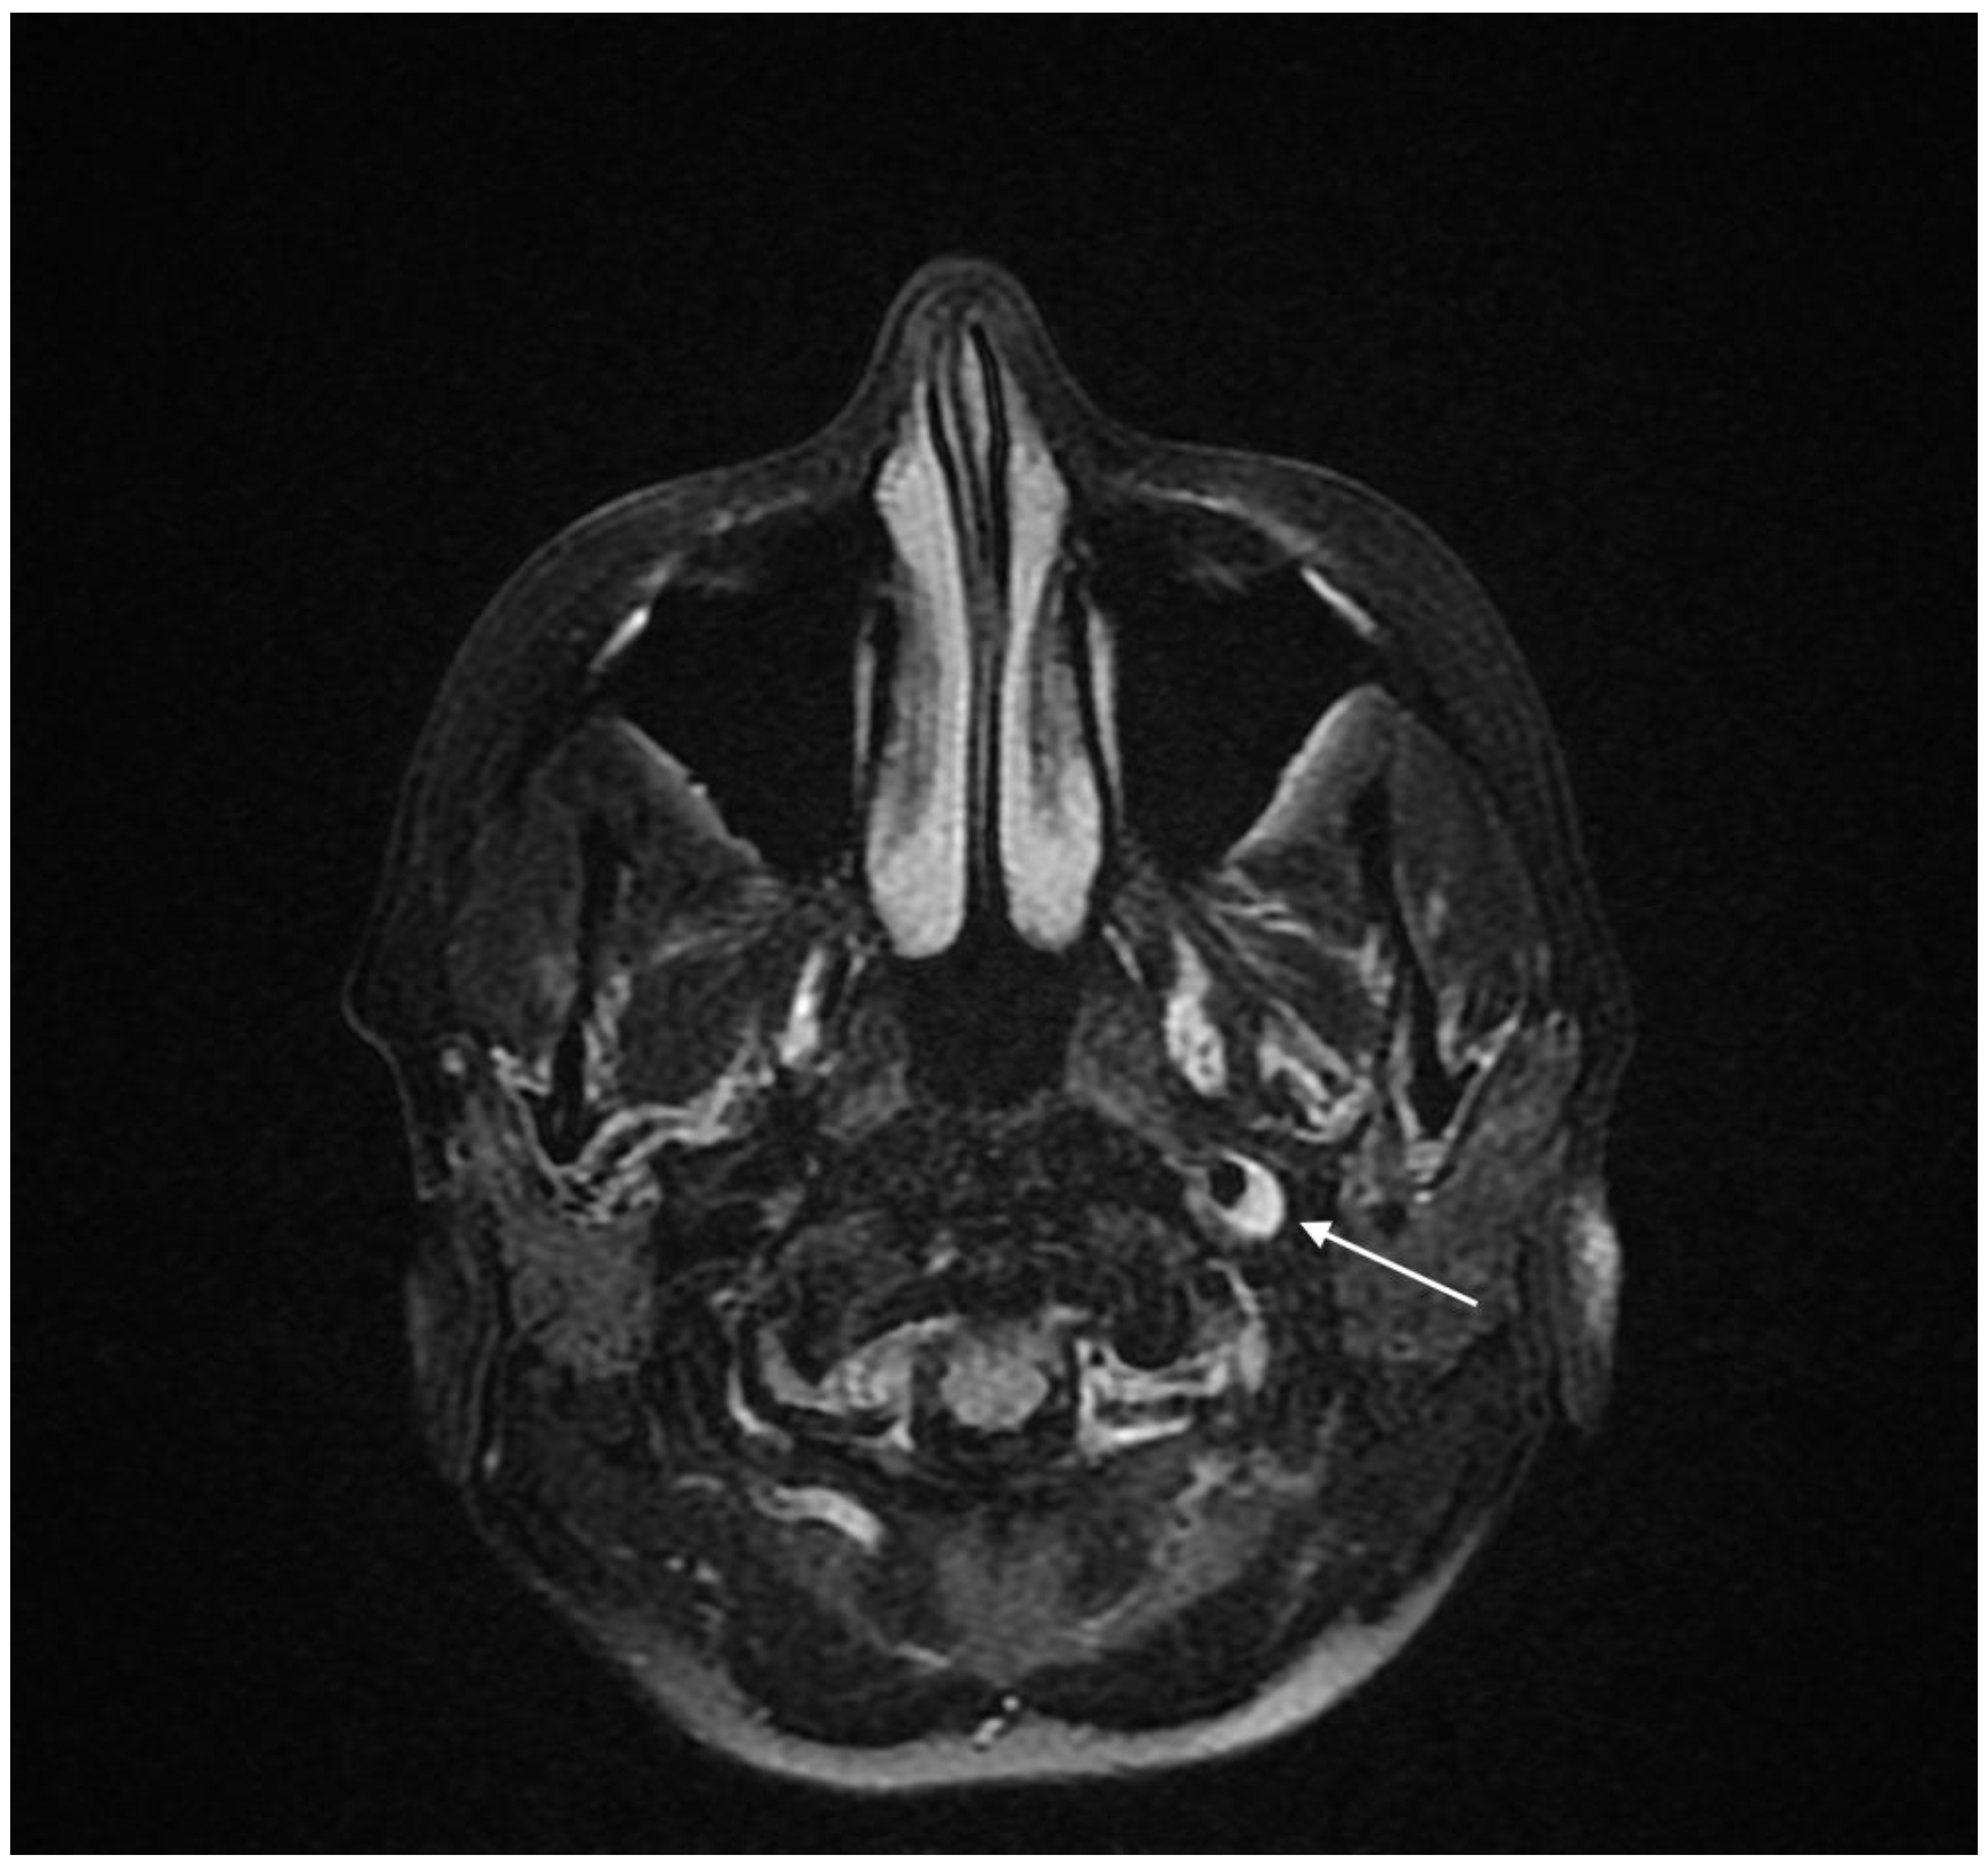 Clinical photograph showing the swelling in the mandibu